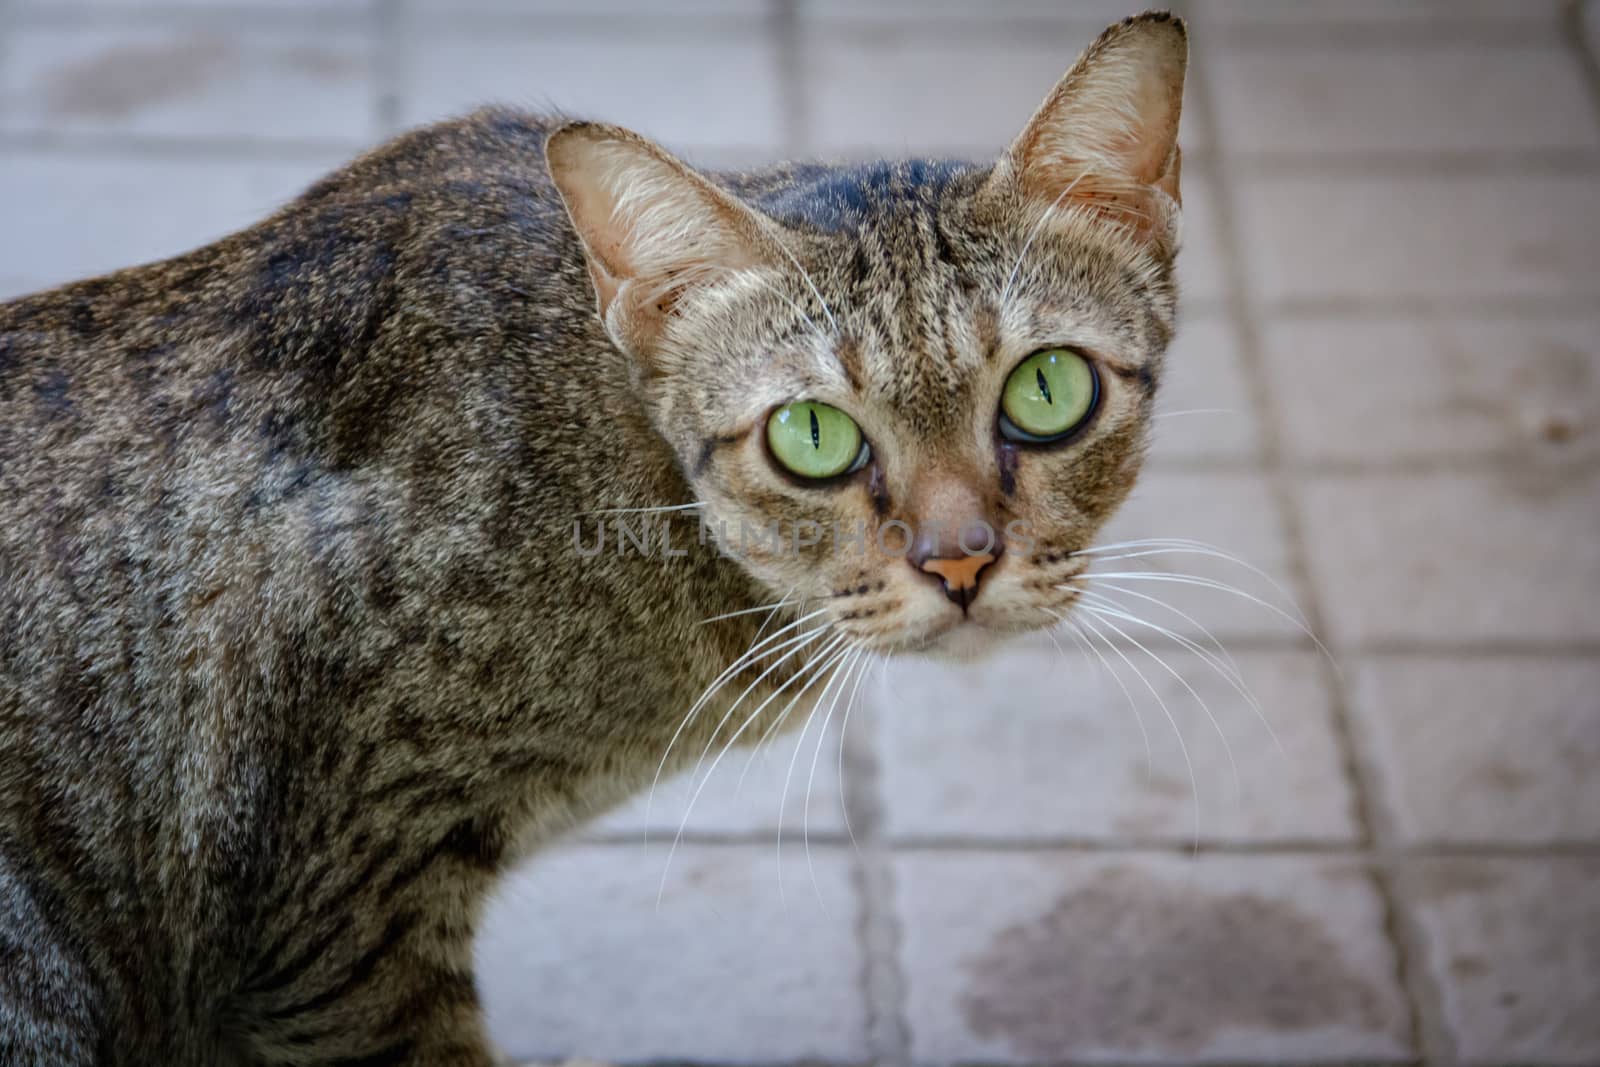 Brown-green cats, green eyes looking